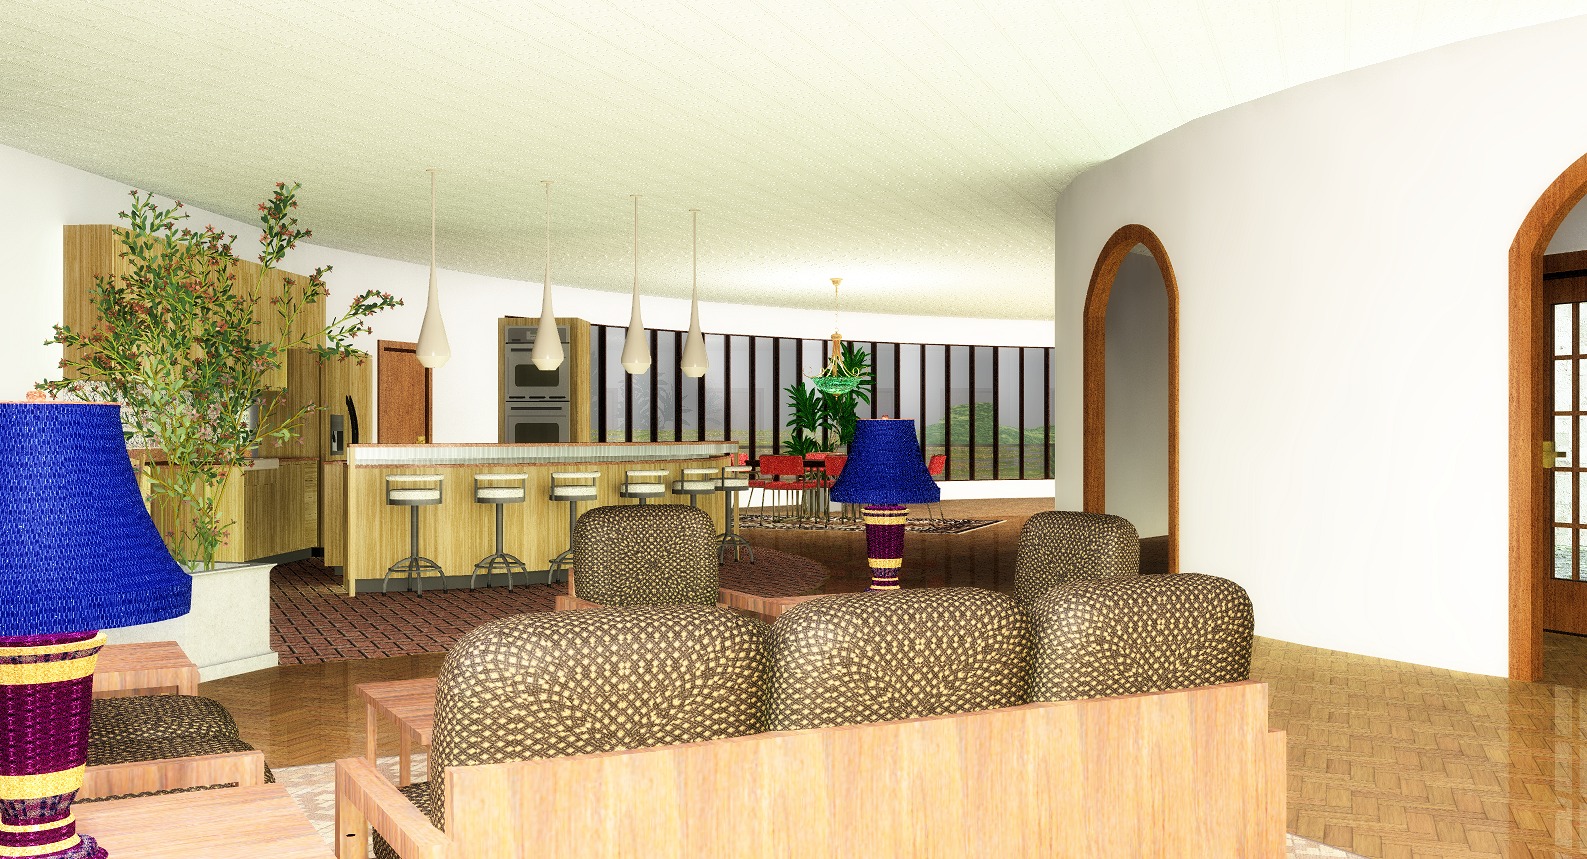 Interior — large open living area